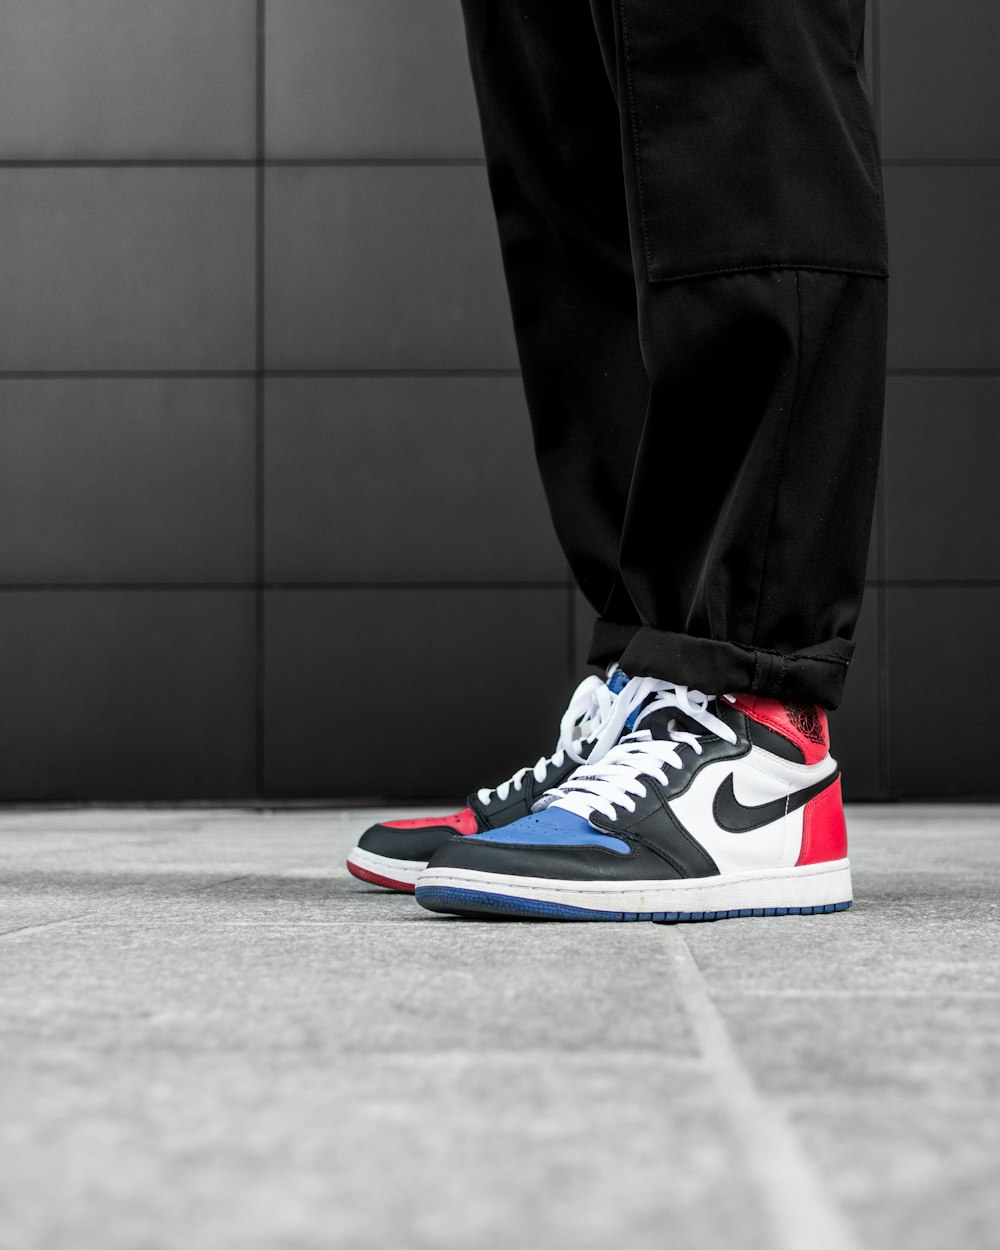 man wears blue-red-and-black Nike Air Jordan 1 shoes photo – Free Shoe Image on